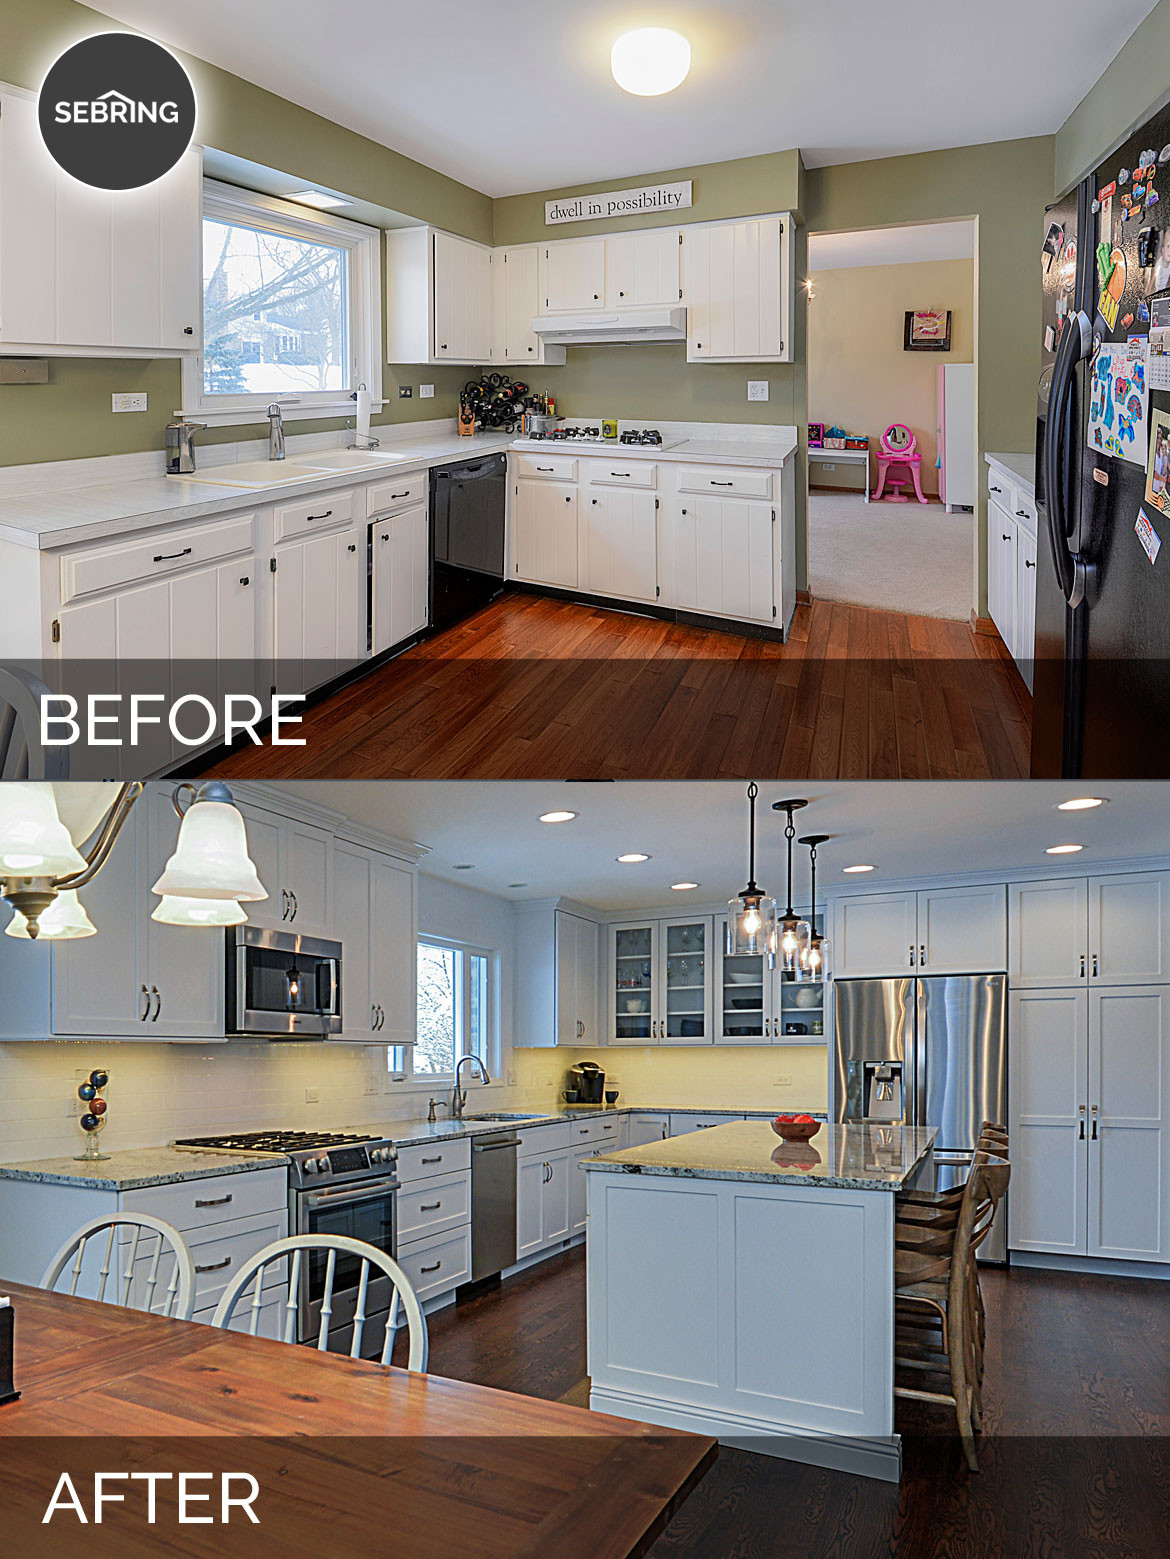 Remodeling Kitchen Before And After
 Ryan & Missy s Kitchen Before & After